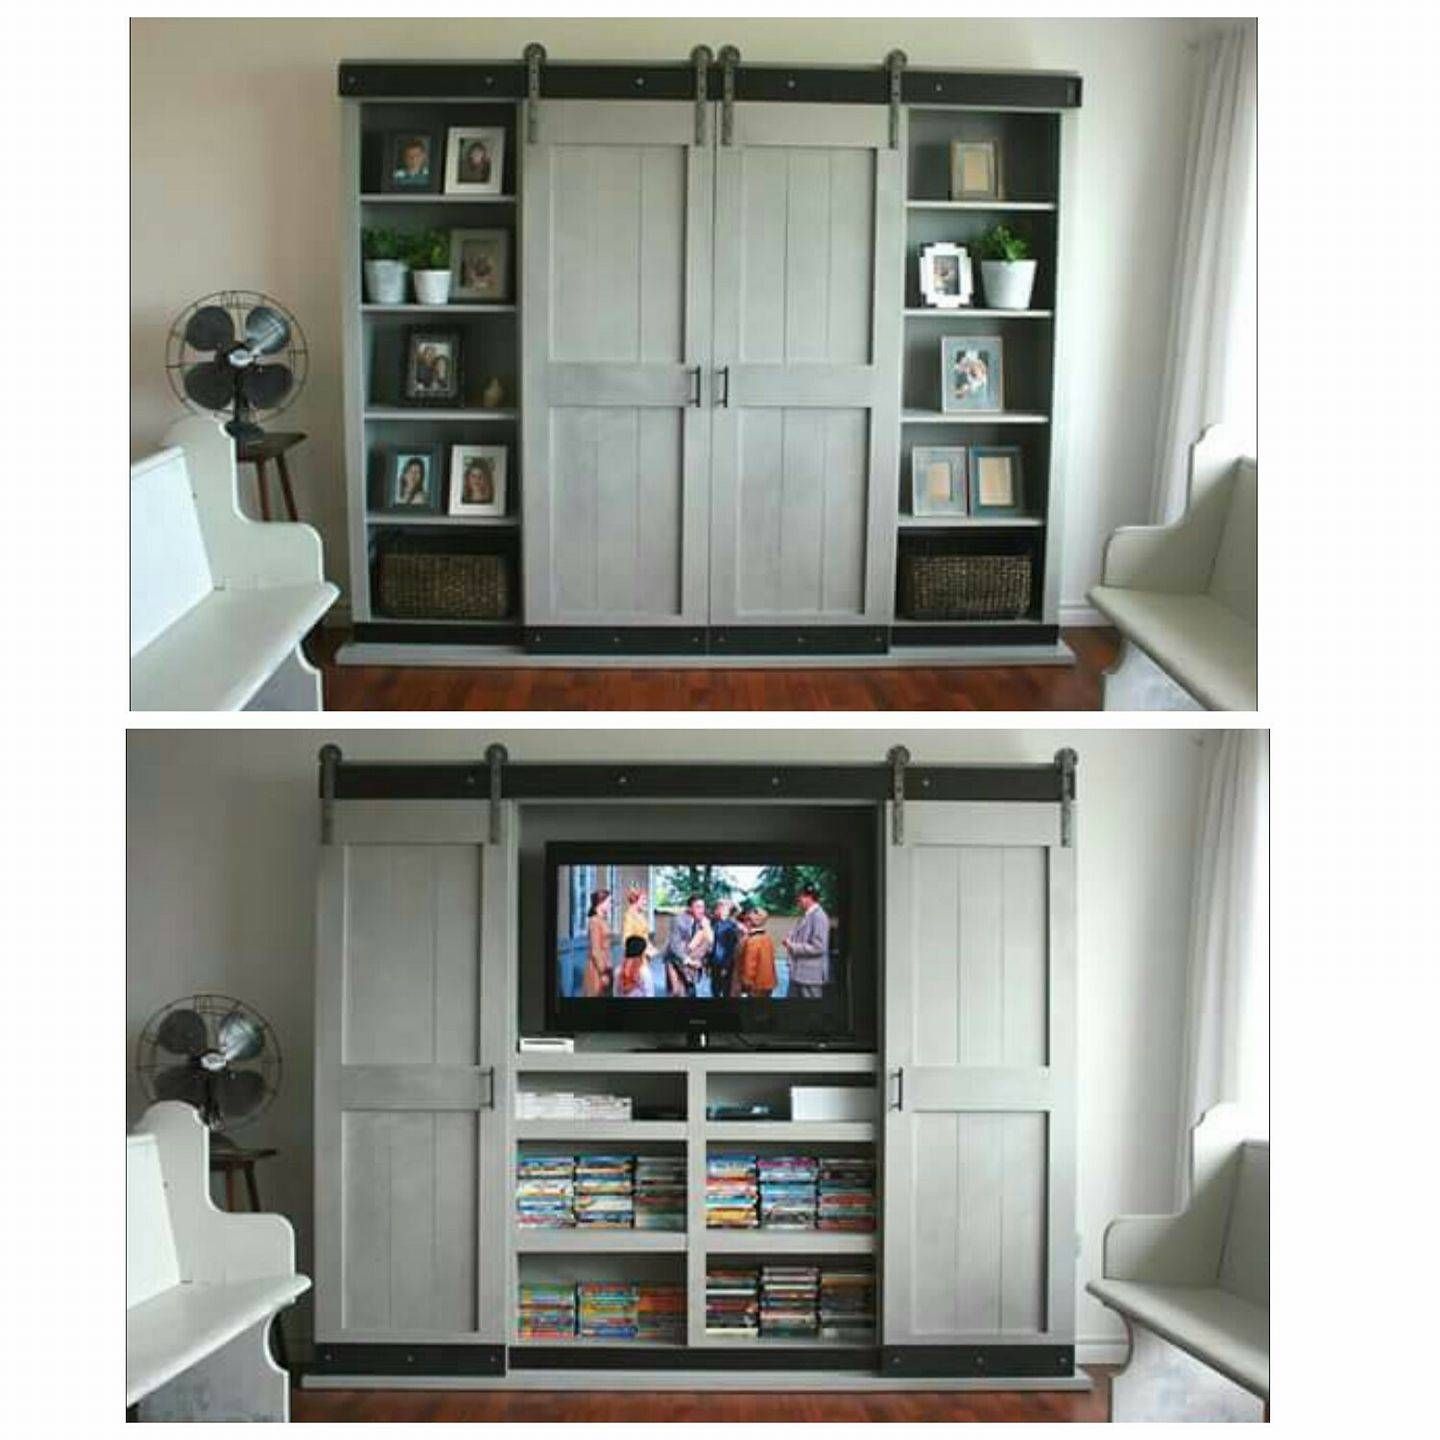 Ana White | Sliding Door Cabinet For Tv – Diy Projects In Tv Hutch Cabinets (View 6 of 15)